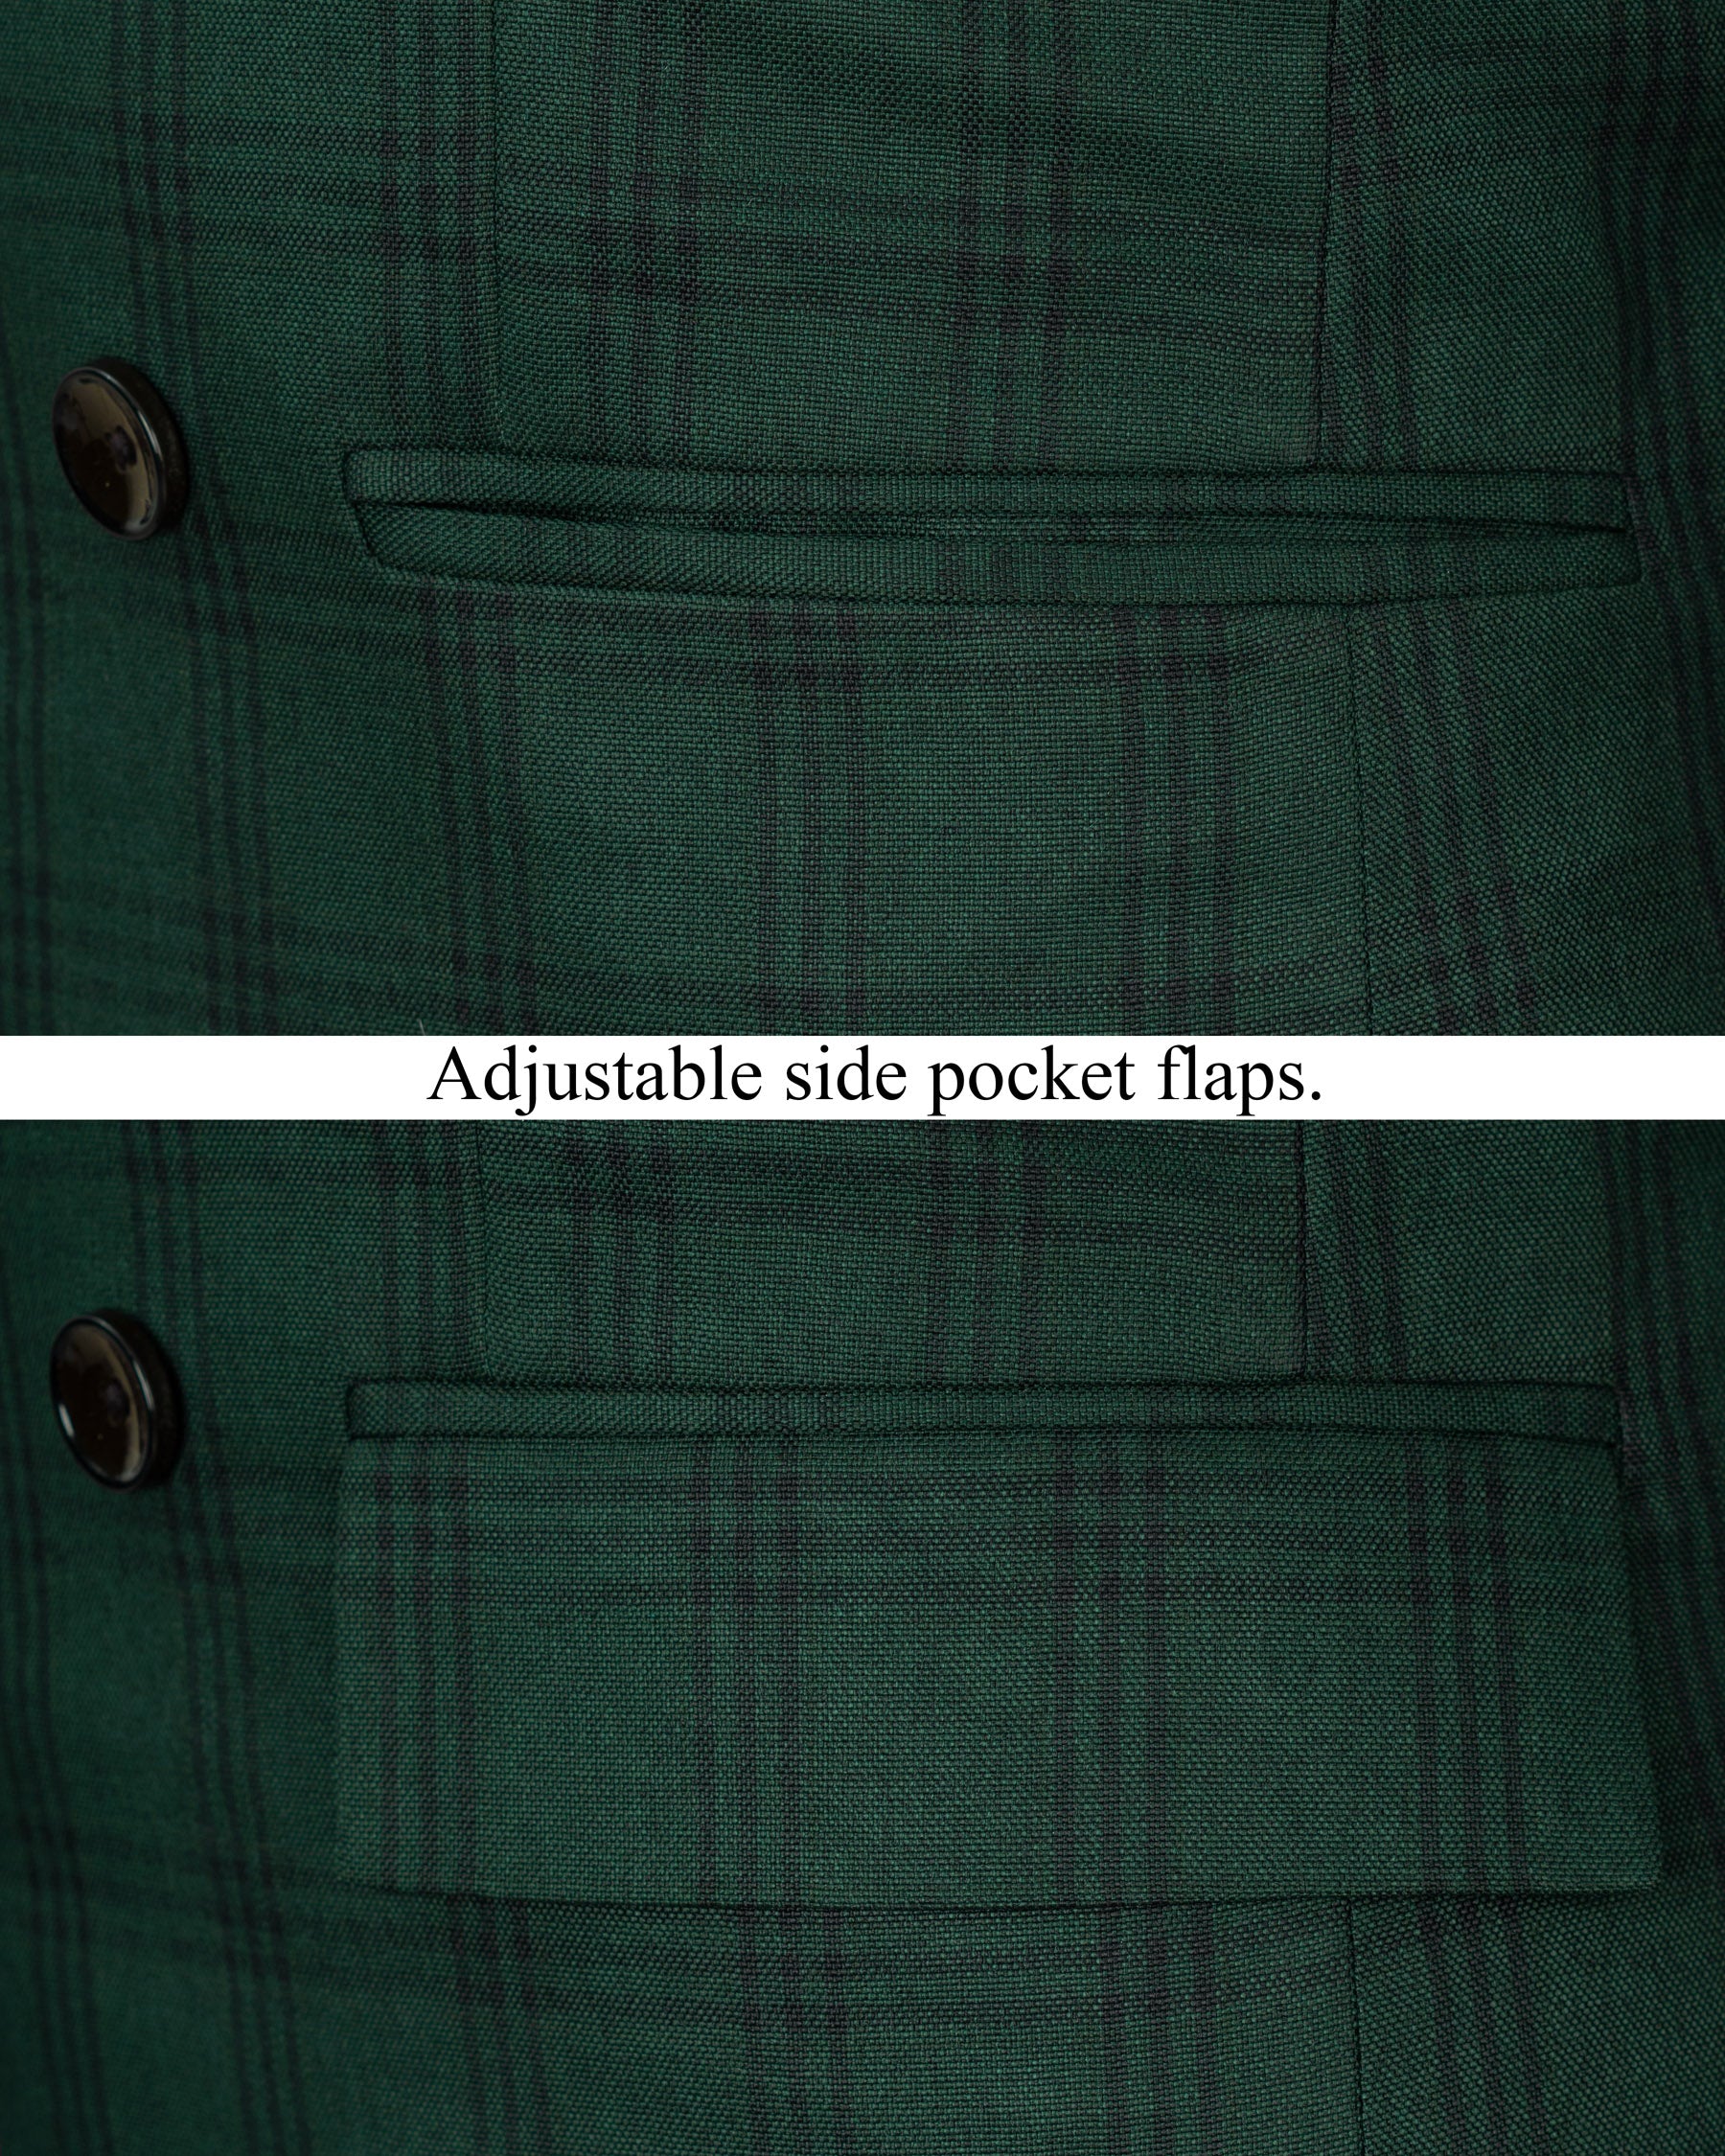 Phthalo Green Windowpane Double Breasted Blazer